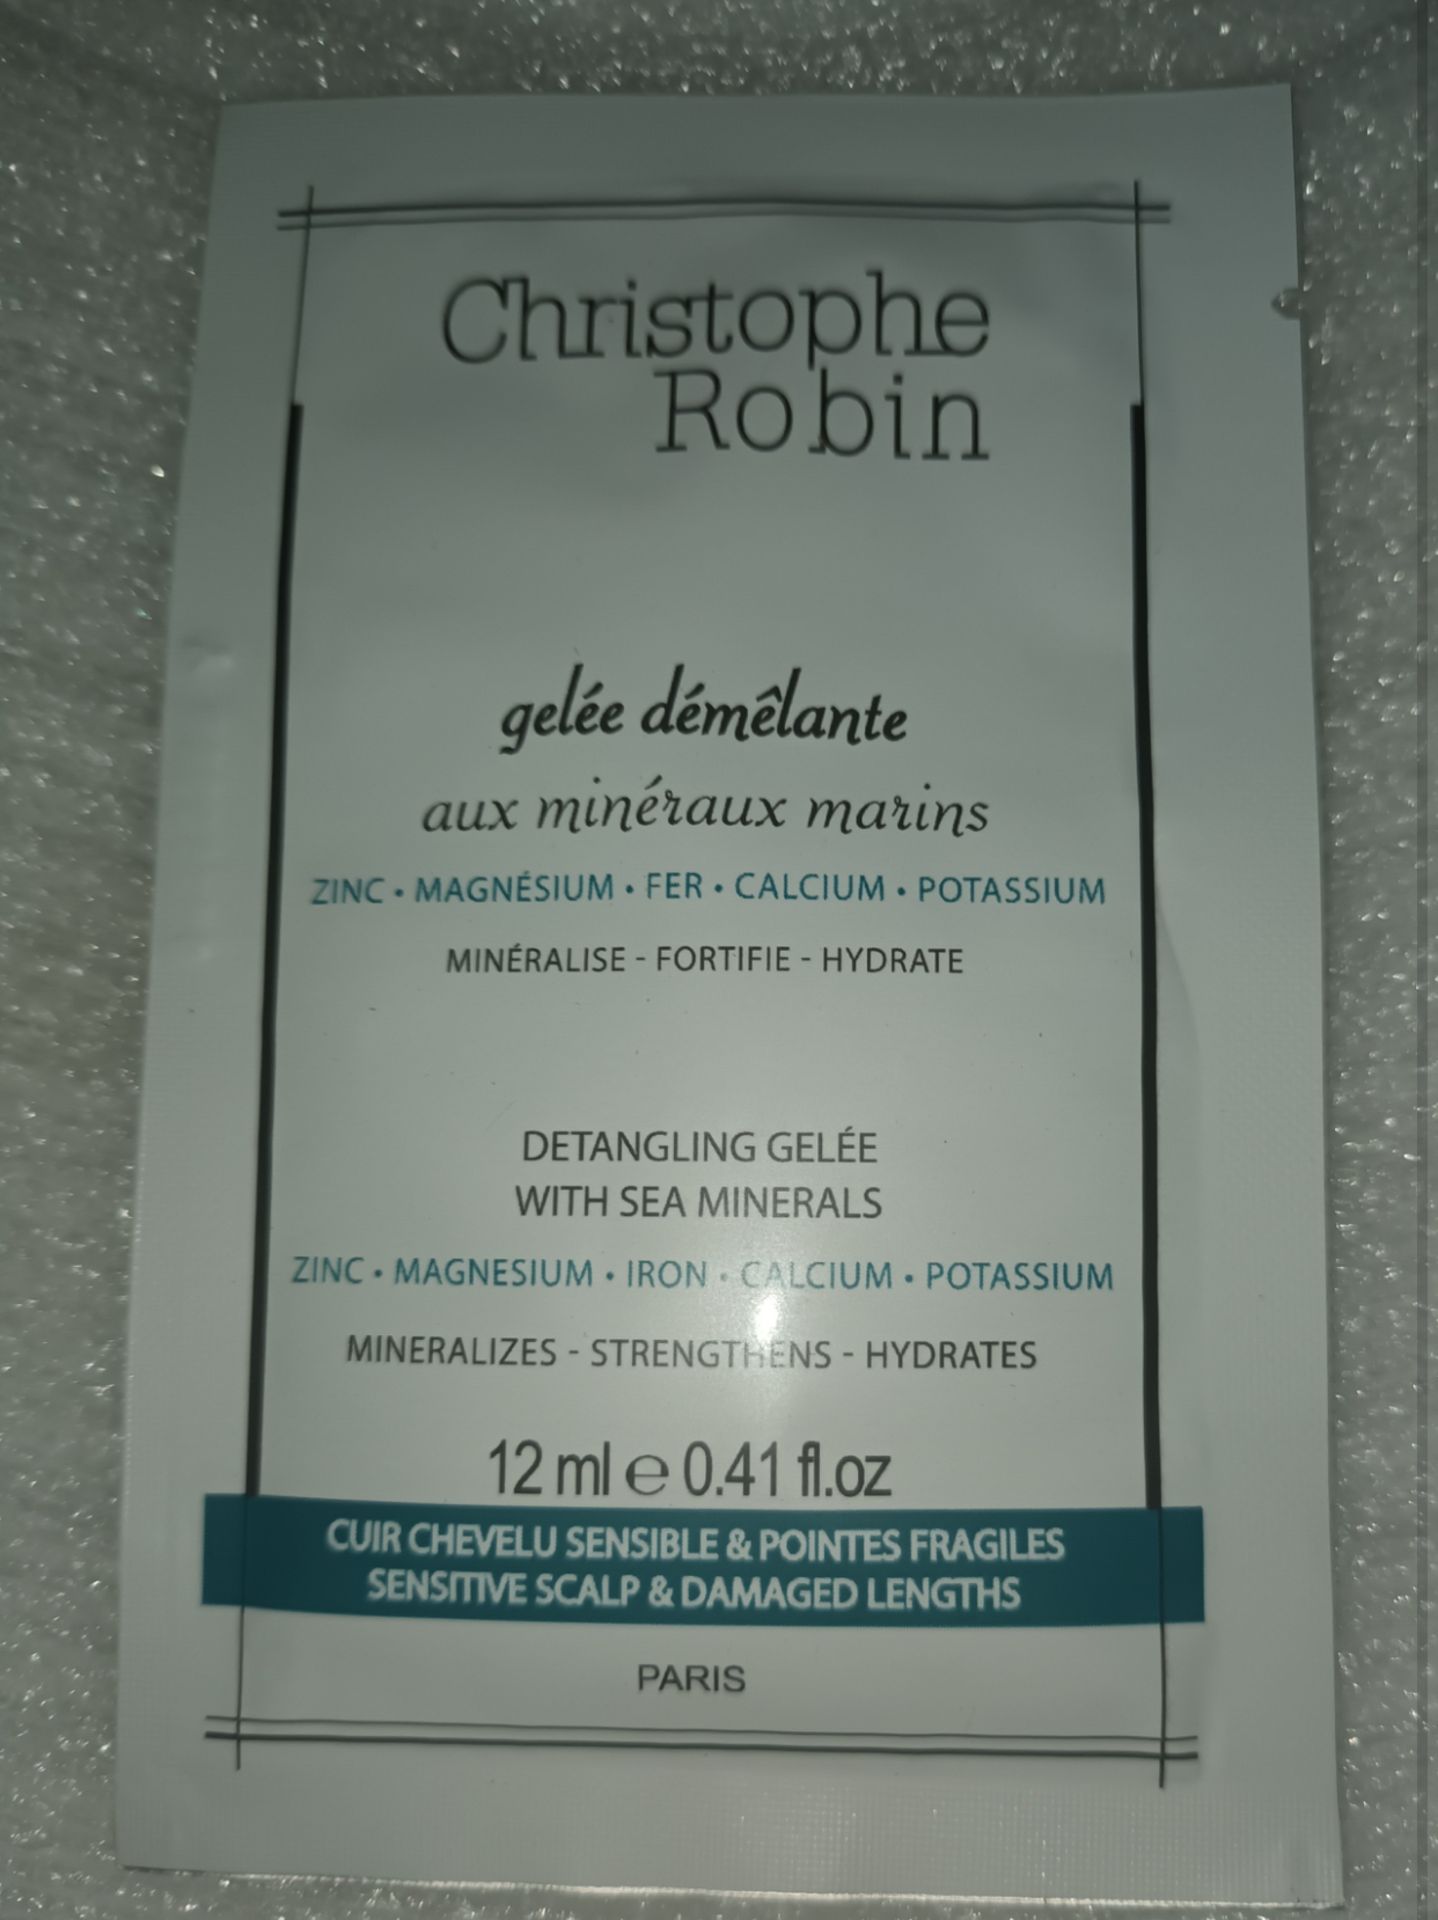 1100 X 12ML CHRISTOPHE ROBIN DETANGLING GELEE WITH SEA MINERALS - Image 2 of 2